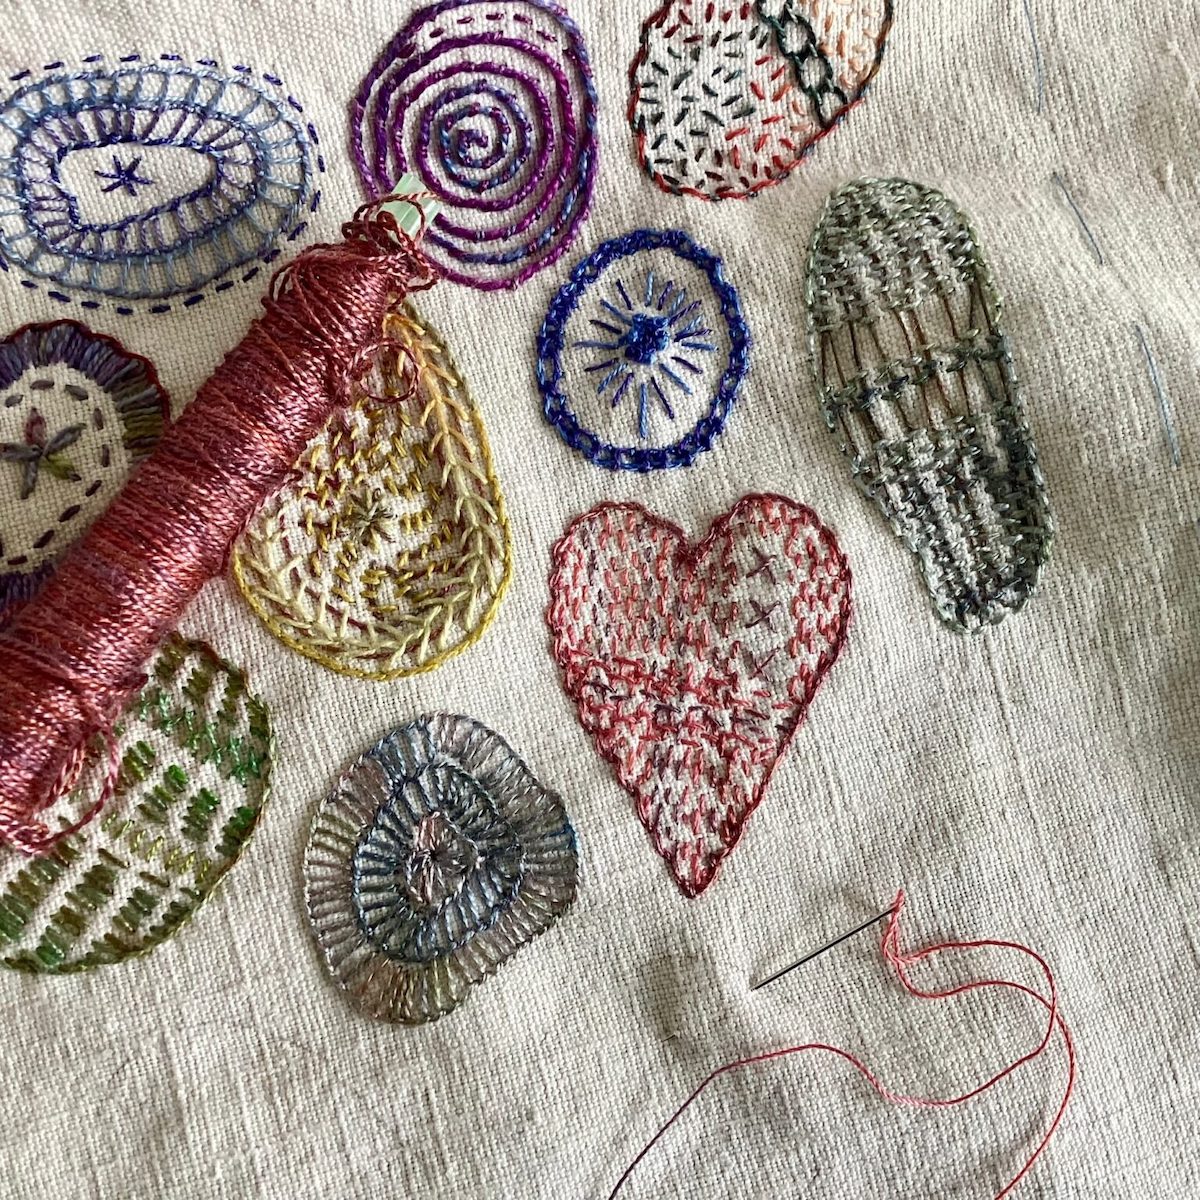 Daily Stitching Project by Karen Turner